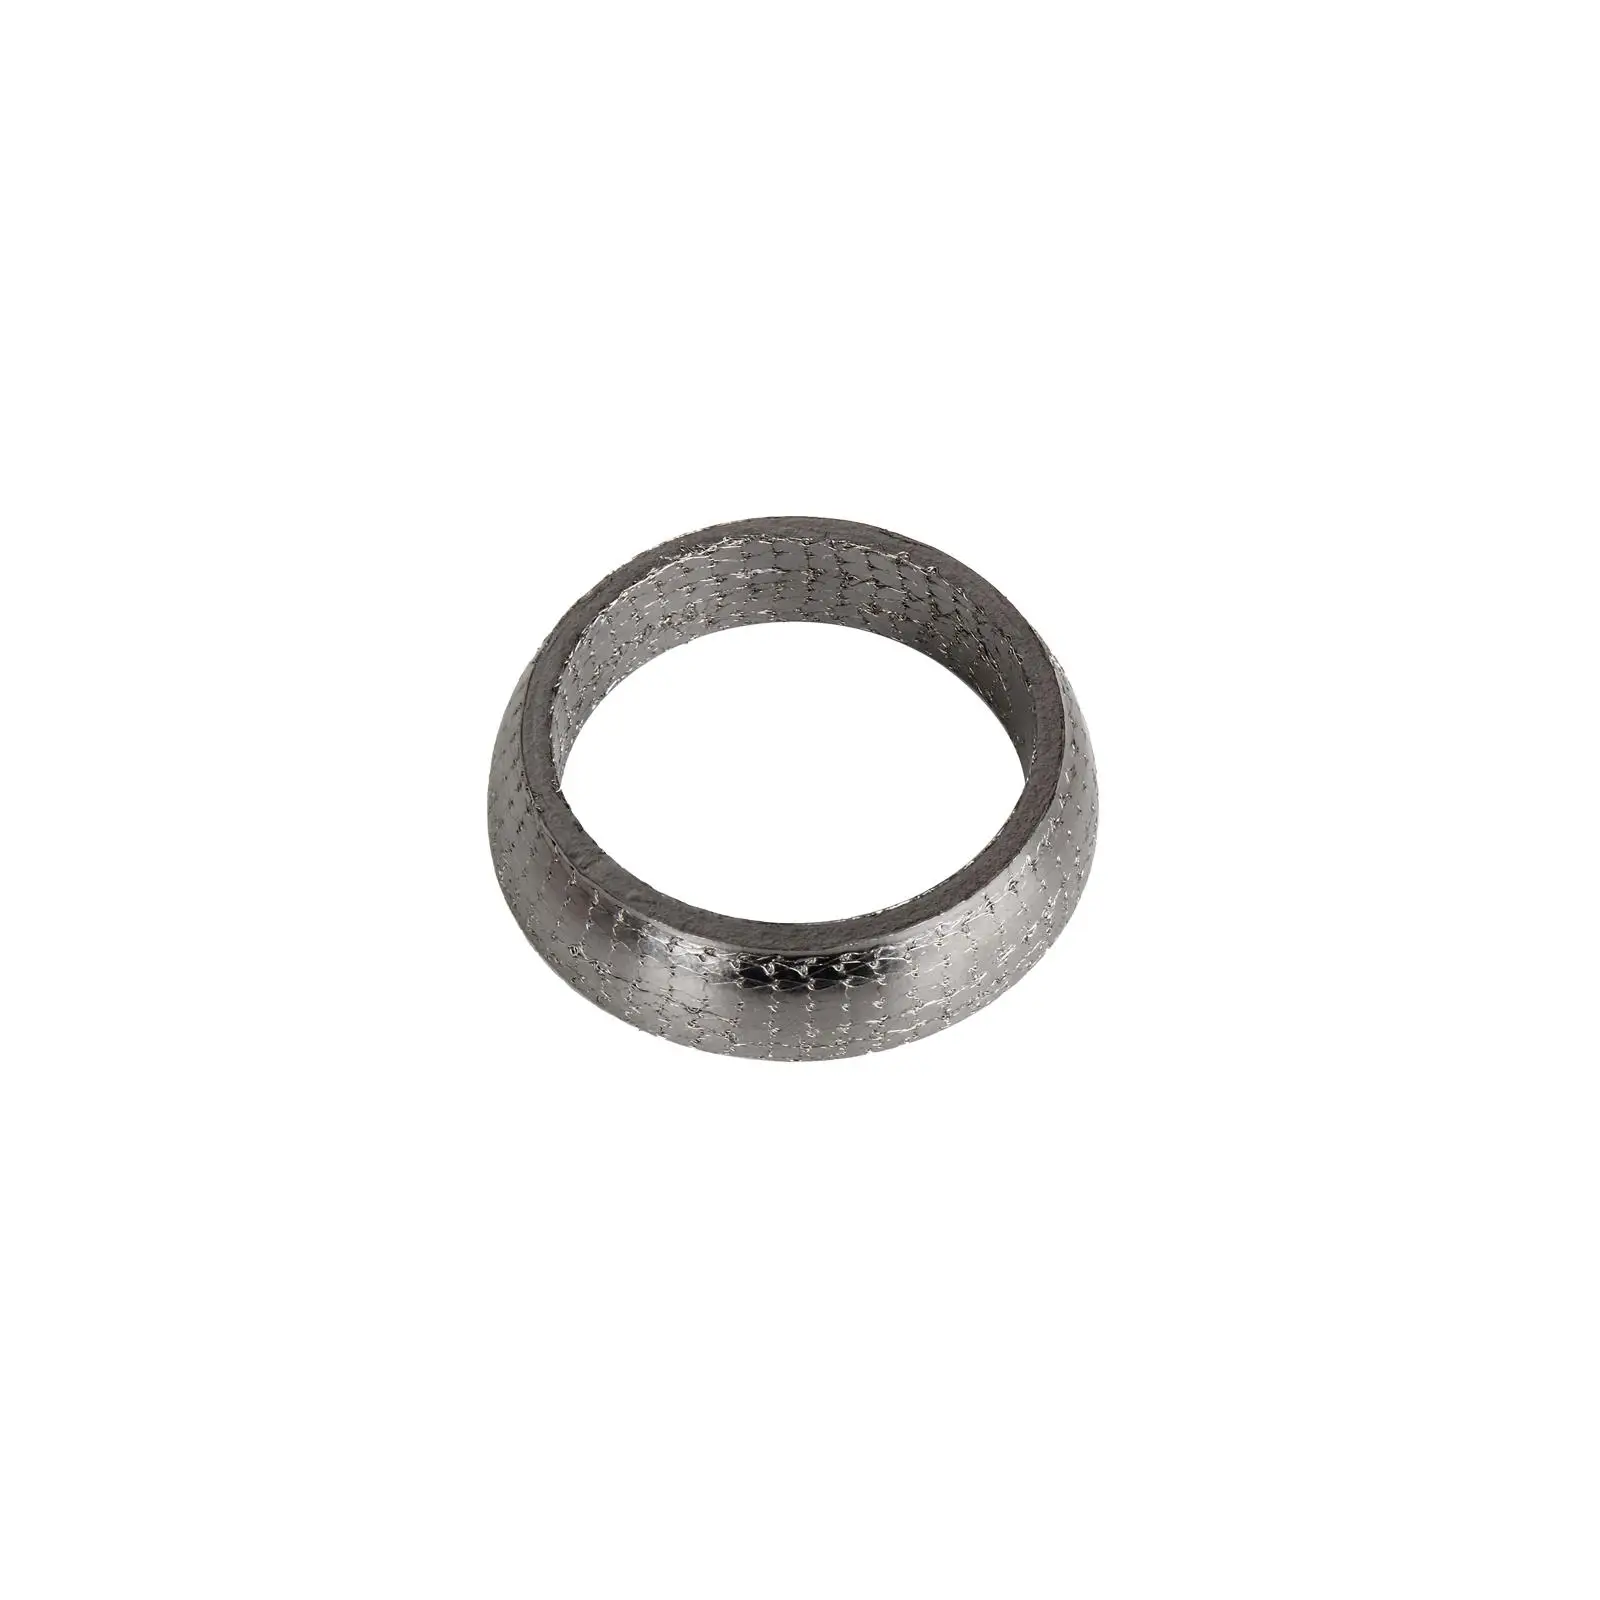 Graphite Gasket Stainless Steel Pipe Accessory Universal Replace Parts 1.49in Donut Style for Cfmoto CF800 CF800cc ATV UTV